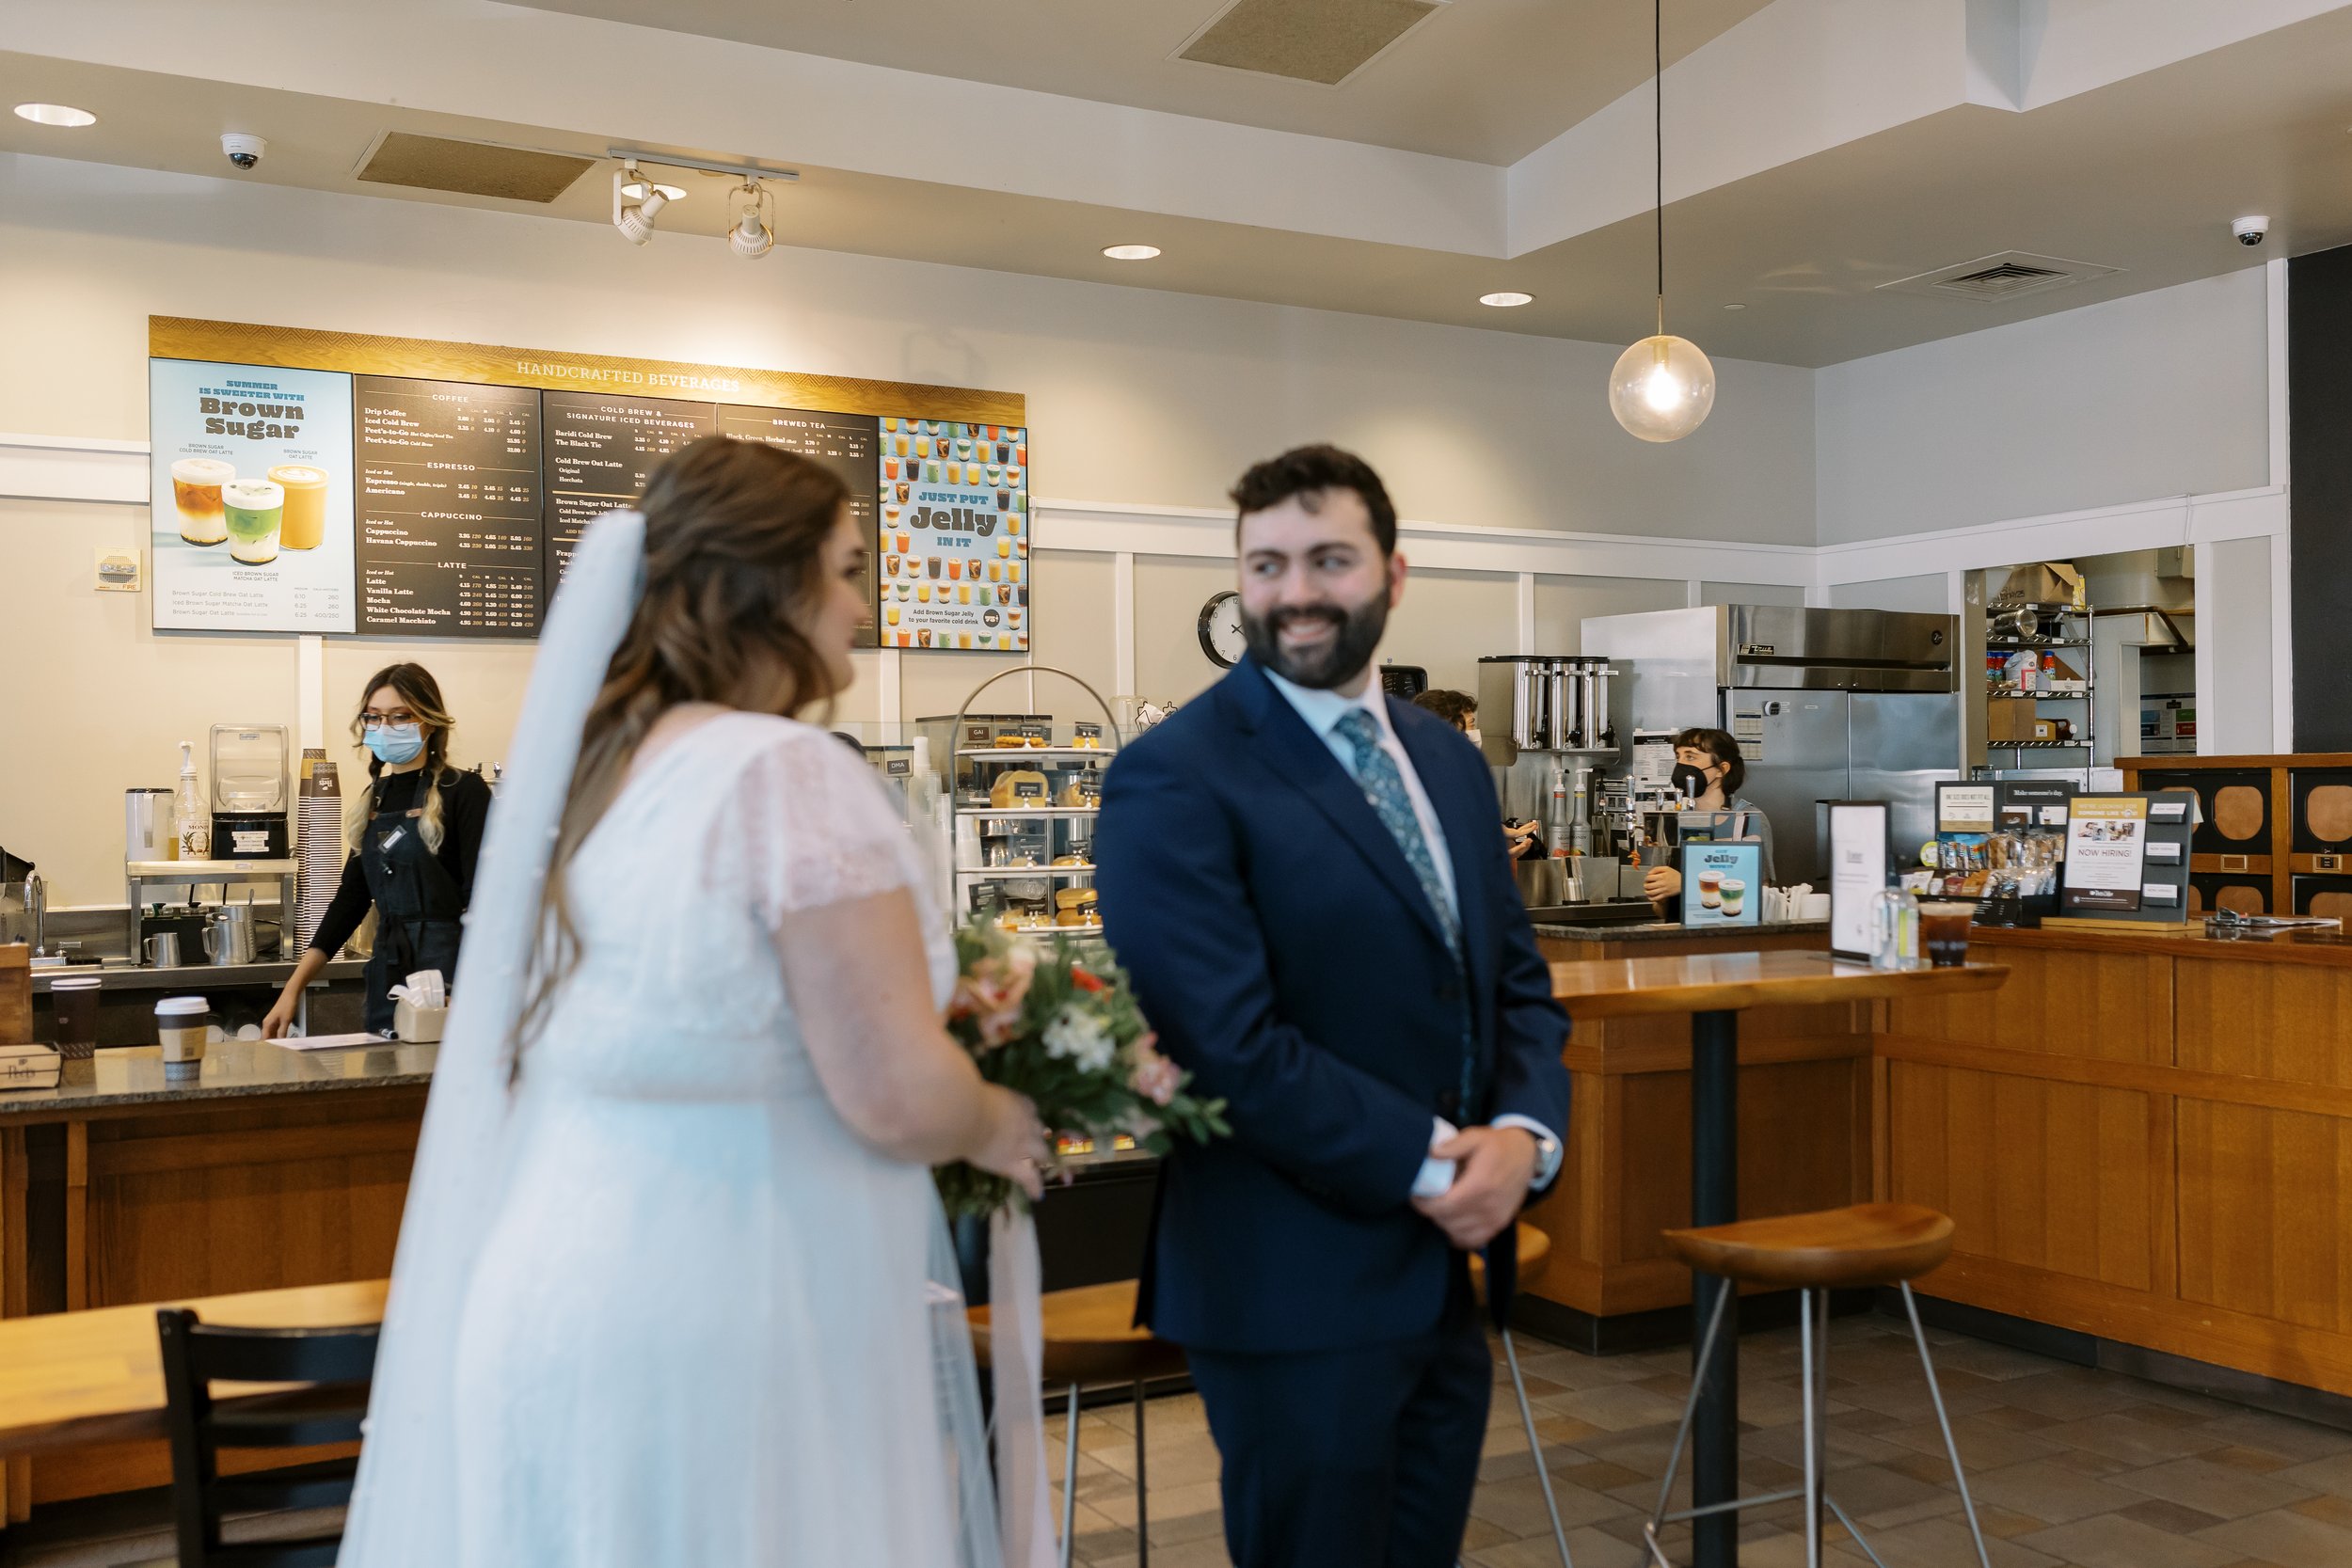  peet’s coffee shop first look elopement photos, woman holding bouquet and groom in navy blue suit 